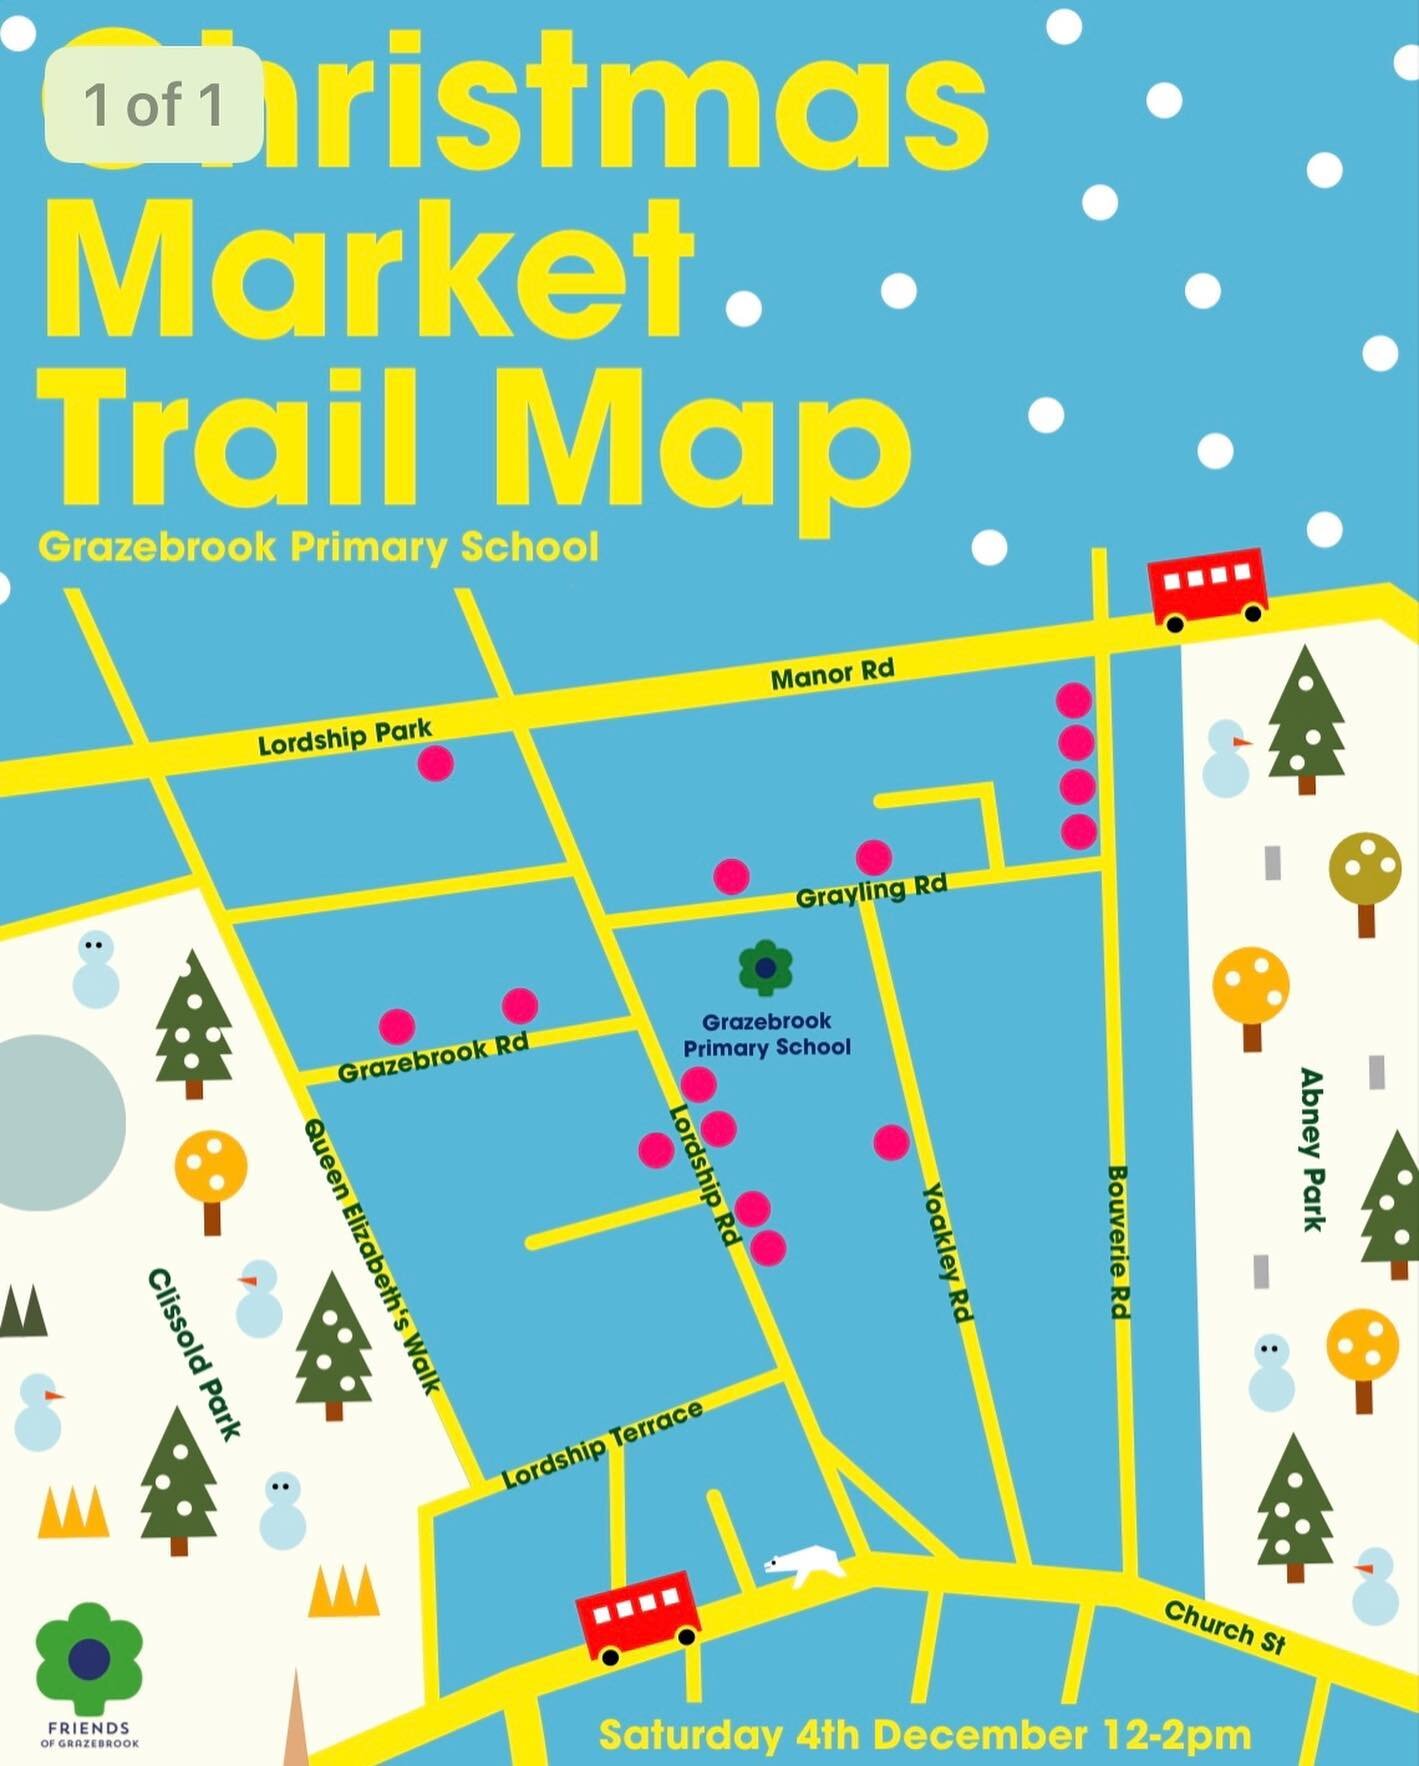 Whoop! Our Christmas Market Trail is go! 
Join us this Saturday from 12-2pm - follow the dots for festive fun. Expect bakes, cakes, toys, books, games, face-painting, mulled wine, crafts, tombola and more 🎄
.
.
#stokenewington #stokenewingtonn16 #st